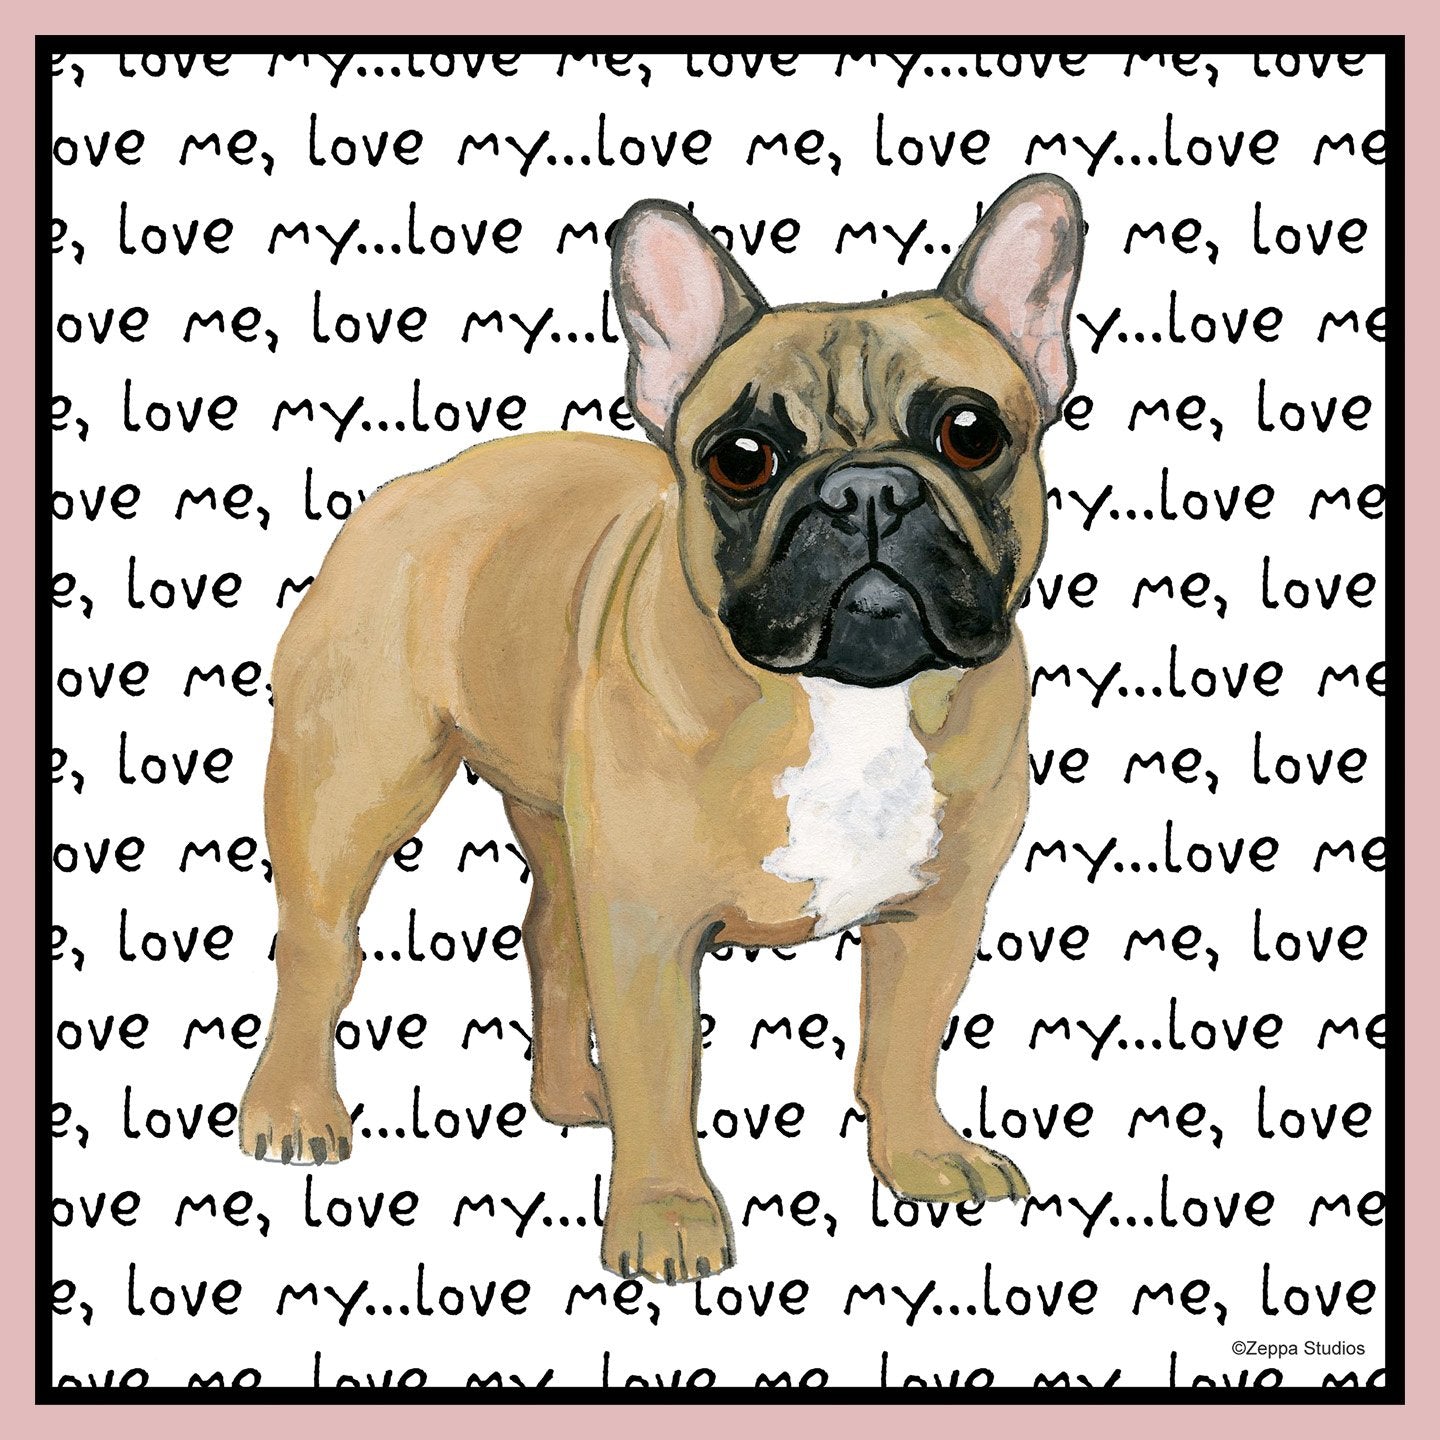 Fawn Frenchie Love Text - Women's Fitted T-Shirt